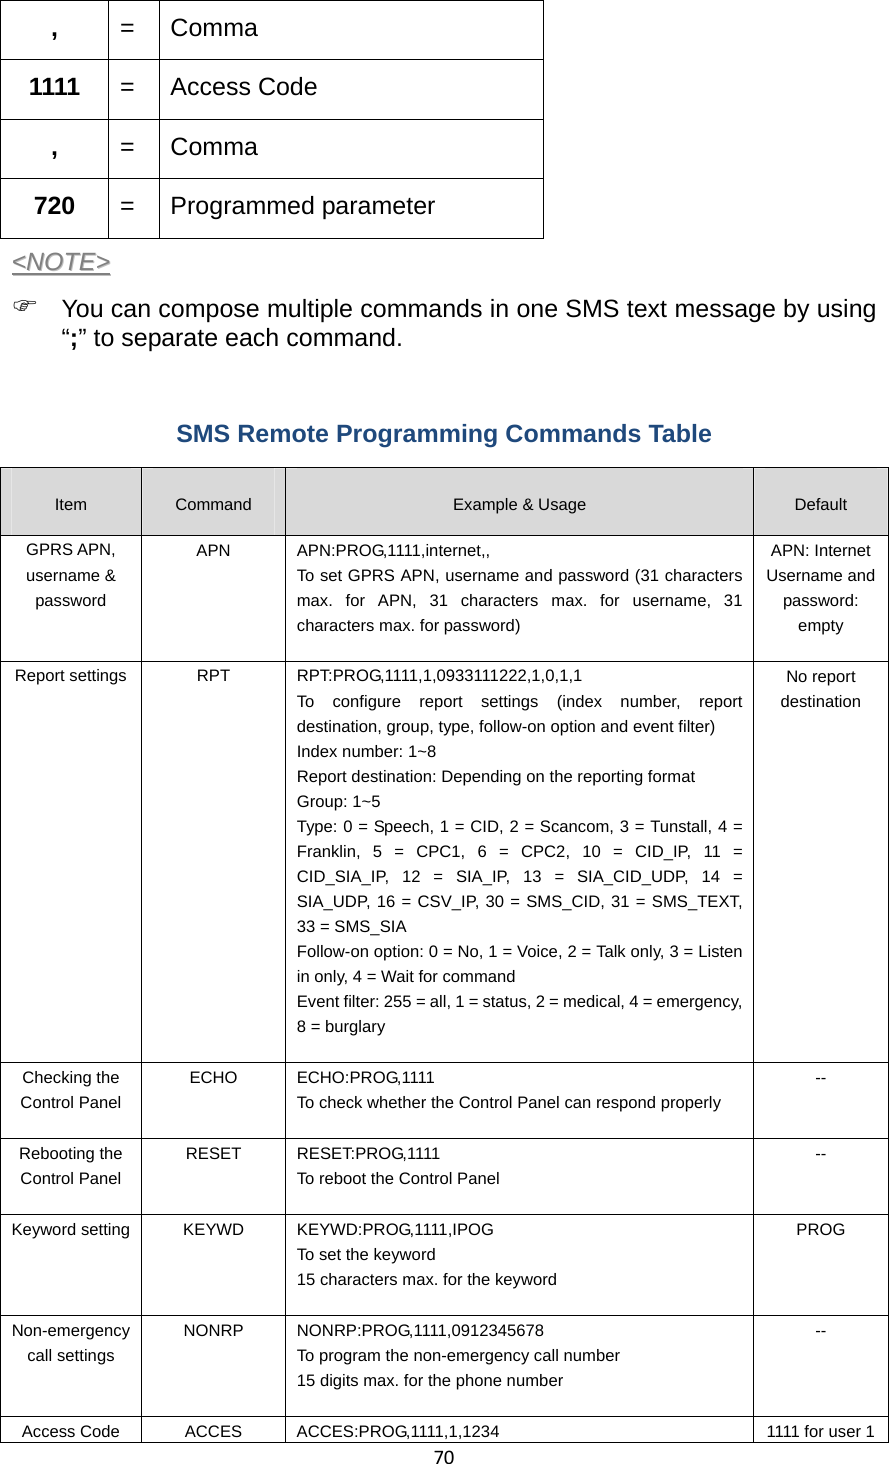 70,  = Comma 1111  = Access Code ,  = Comma 720  = Programmed parameter &lt;&lt;NNOOTTEE&gt;&gt;  ) You can compose multiple commands in one SMS text message by using “;” to separate each command.    SMS Remote Programming Commands Table   Item  Command  Example &amp; Usage  Default GPRS APN, username &amp; password APN APN:PROG,1111,internet,, To set GPRS APN, username and password (31 characters max. for APN, 31 characters max. for username, 31 characters max. for password)  APN: InternetUsername and password: empty Report settings  RPT  RPT:PROG,1111,1,0933111222,1,0,1,1 To configure report settings (index number, report destination, group, type, follow-on option and event filter) Index number: 1~8 Report destination: Depending on the reporting format Group: 1~5 Type: 0 = Speech, 1 = CID, 2 = Scancom, 3 = Tunstall, 4 = Franklin, 5 = CPC1, 6 = CPC2, 10 = CID_IP, 11 = CID_SIA_IP, 12 = SIA_IP, 13 = SIA_CID_UDP, 14 = SIA_UDP, 16 = CSV_IP, 30 = SMS_CID, 31 = SMS_TEXT, 33 = SMS_SIA Follow-on option: 0 = No, 1 = Voice, 2 = Talk only, 3 = Listen in only, 4 = Wait for command     Event filter: 255 = all, 1 = status, 2 = medical, 4 = emergency, 8 = burglary    No report destination Checking the Control Panel ECHO ECHO:PROG,1111 To check whether the Control Panel can respond properly  -- Rebooting the Control Panel RESET RESET:PROG,1111 To reboot the Control Panel  -- Keyword setting  KEYWD  KEYWD:PROG,1111,IPOG To set the keyword 15 characters max. for the keyword  PROG Non-emergency call settings NONRP NONRP:PROG,1111,0912345678 To program the non-emergency call number 15 digits max. for the phone number  -- Access Code  ACCES  ACCES:PROG,1111,1,1234  1111 for user 1